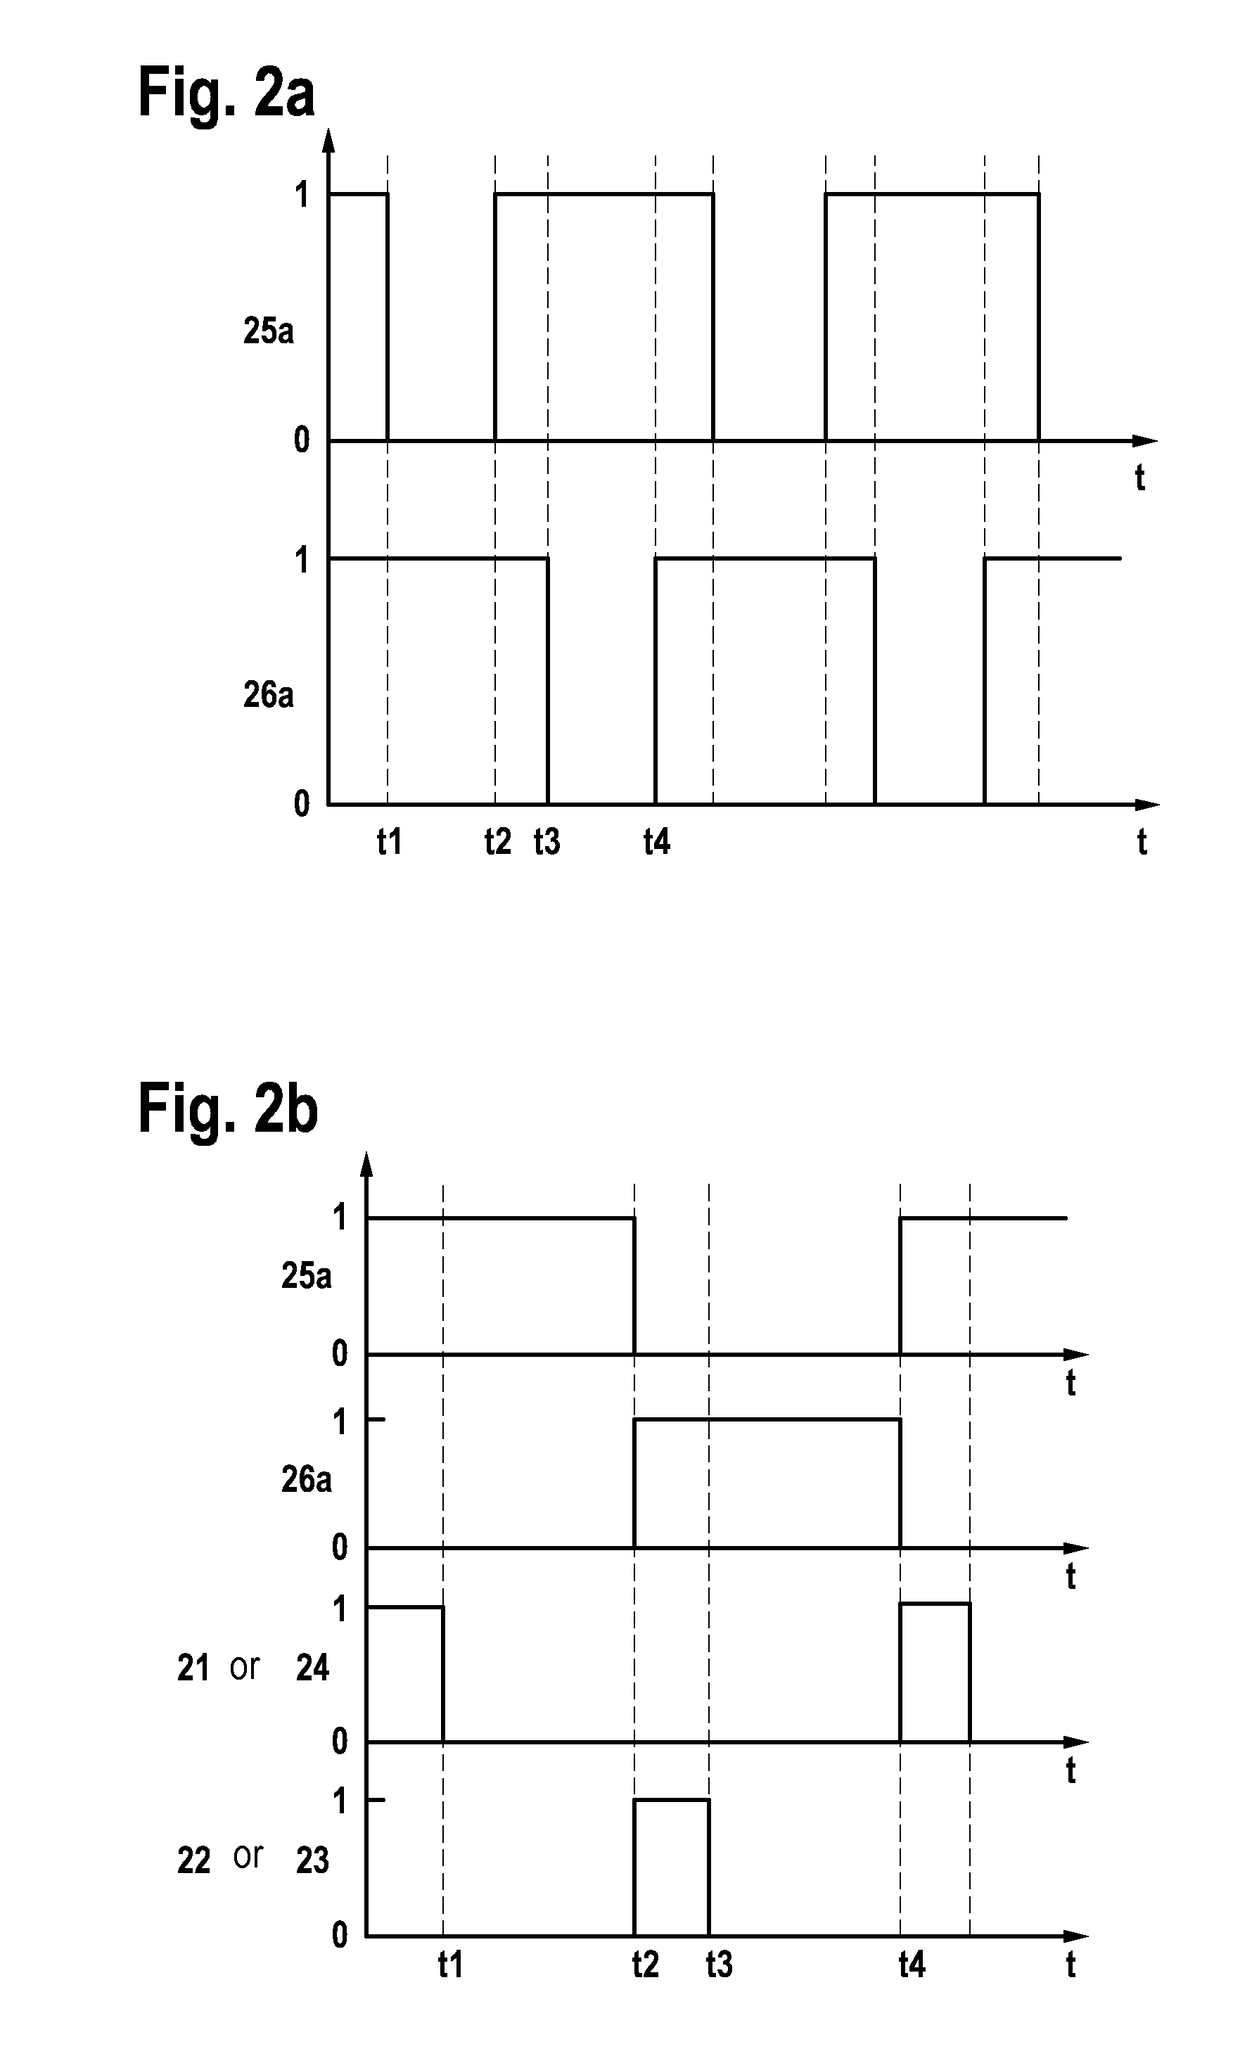 Modulation method for the boost converter operating mode of a push-pull converter